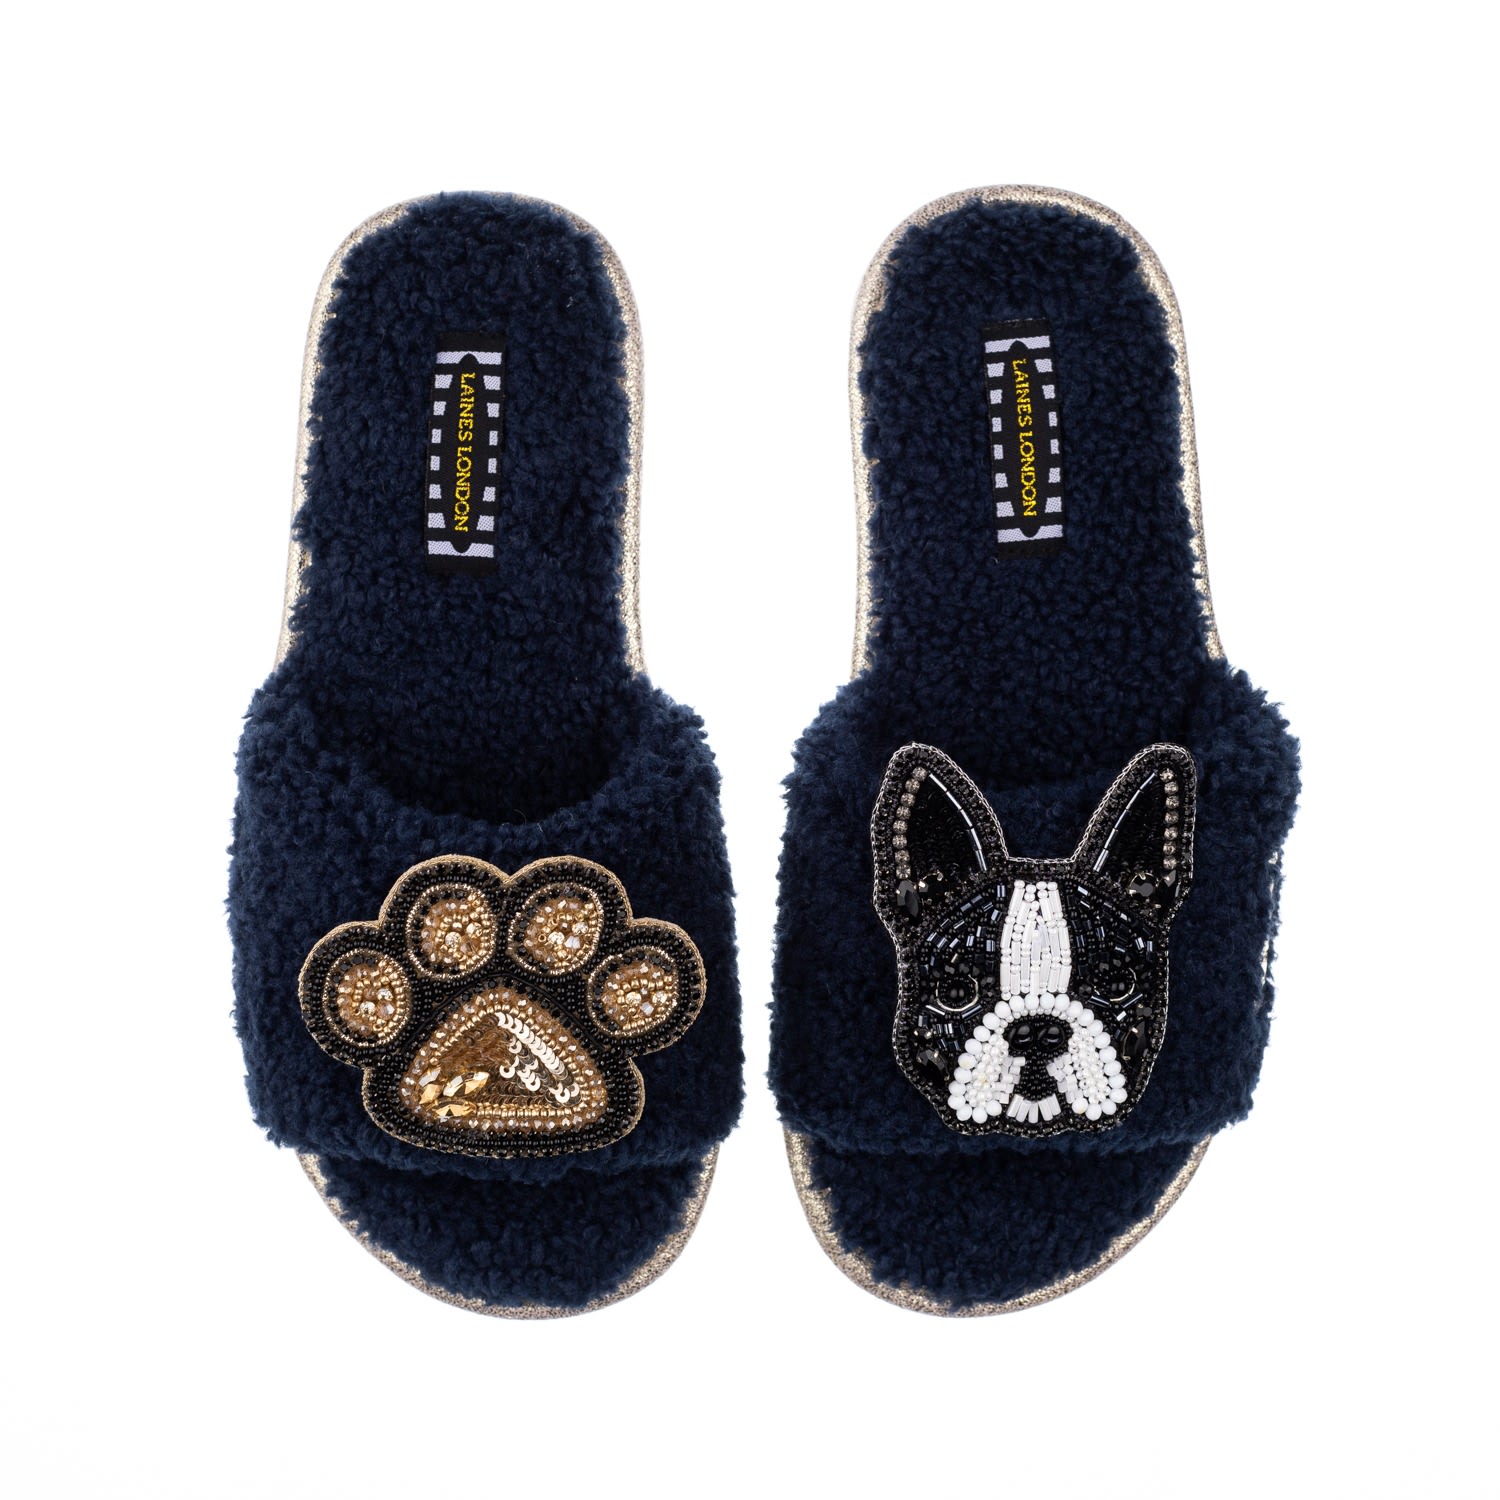 Women’s Blue Teddy Towelling Slipper Sliders With Buddy Boston Terrier & Paw Brooches - Navy Small Laines London